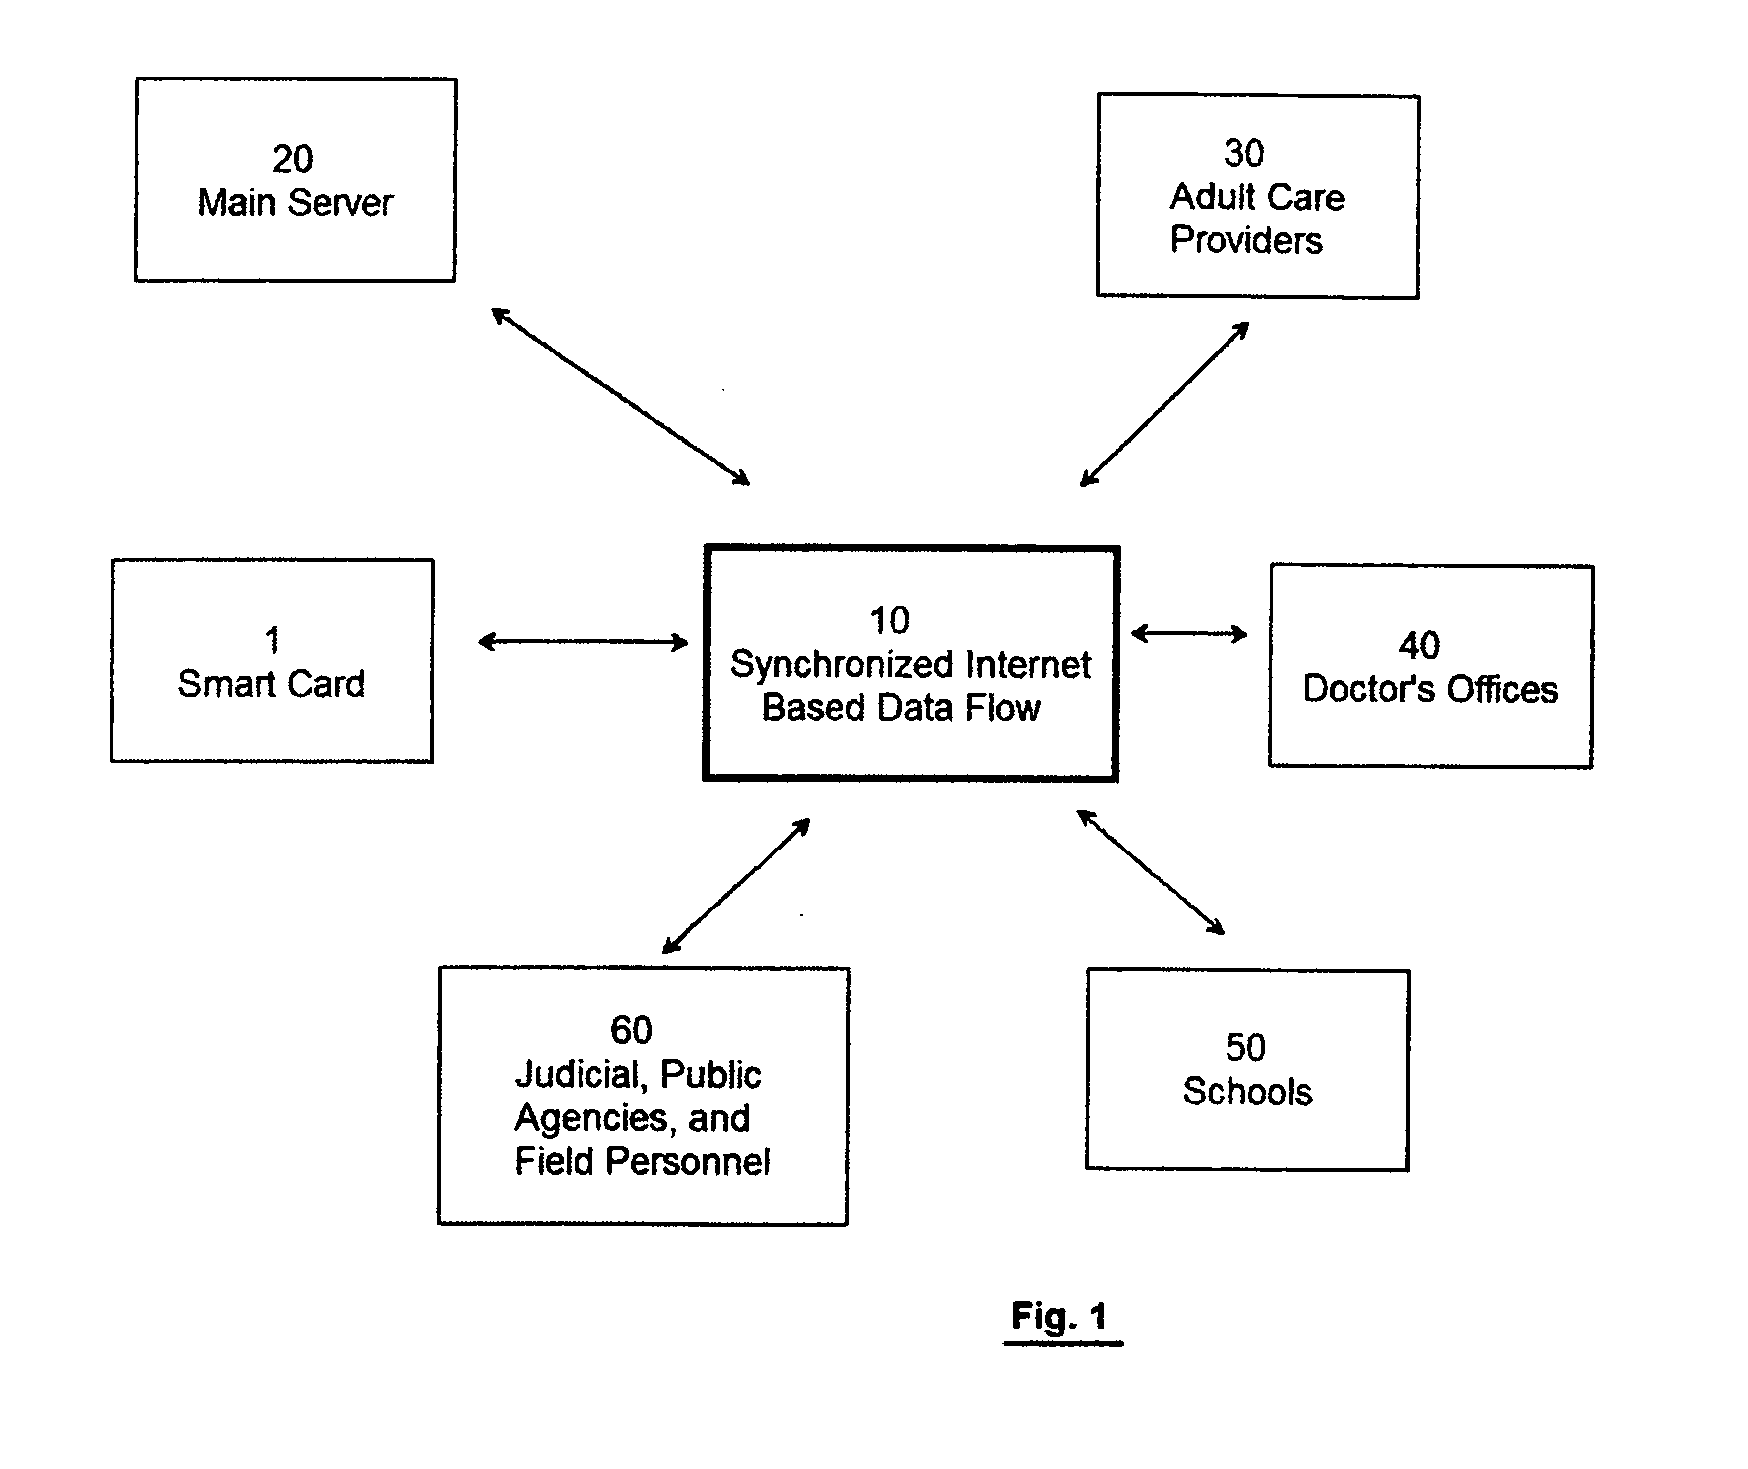 Real-time status and event monitoring system for foster children with various user levels of access